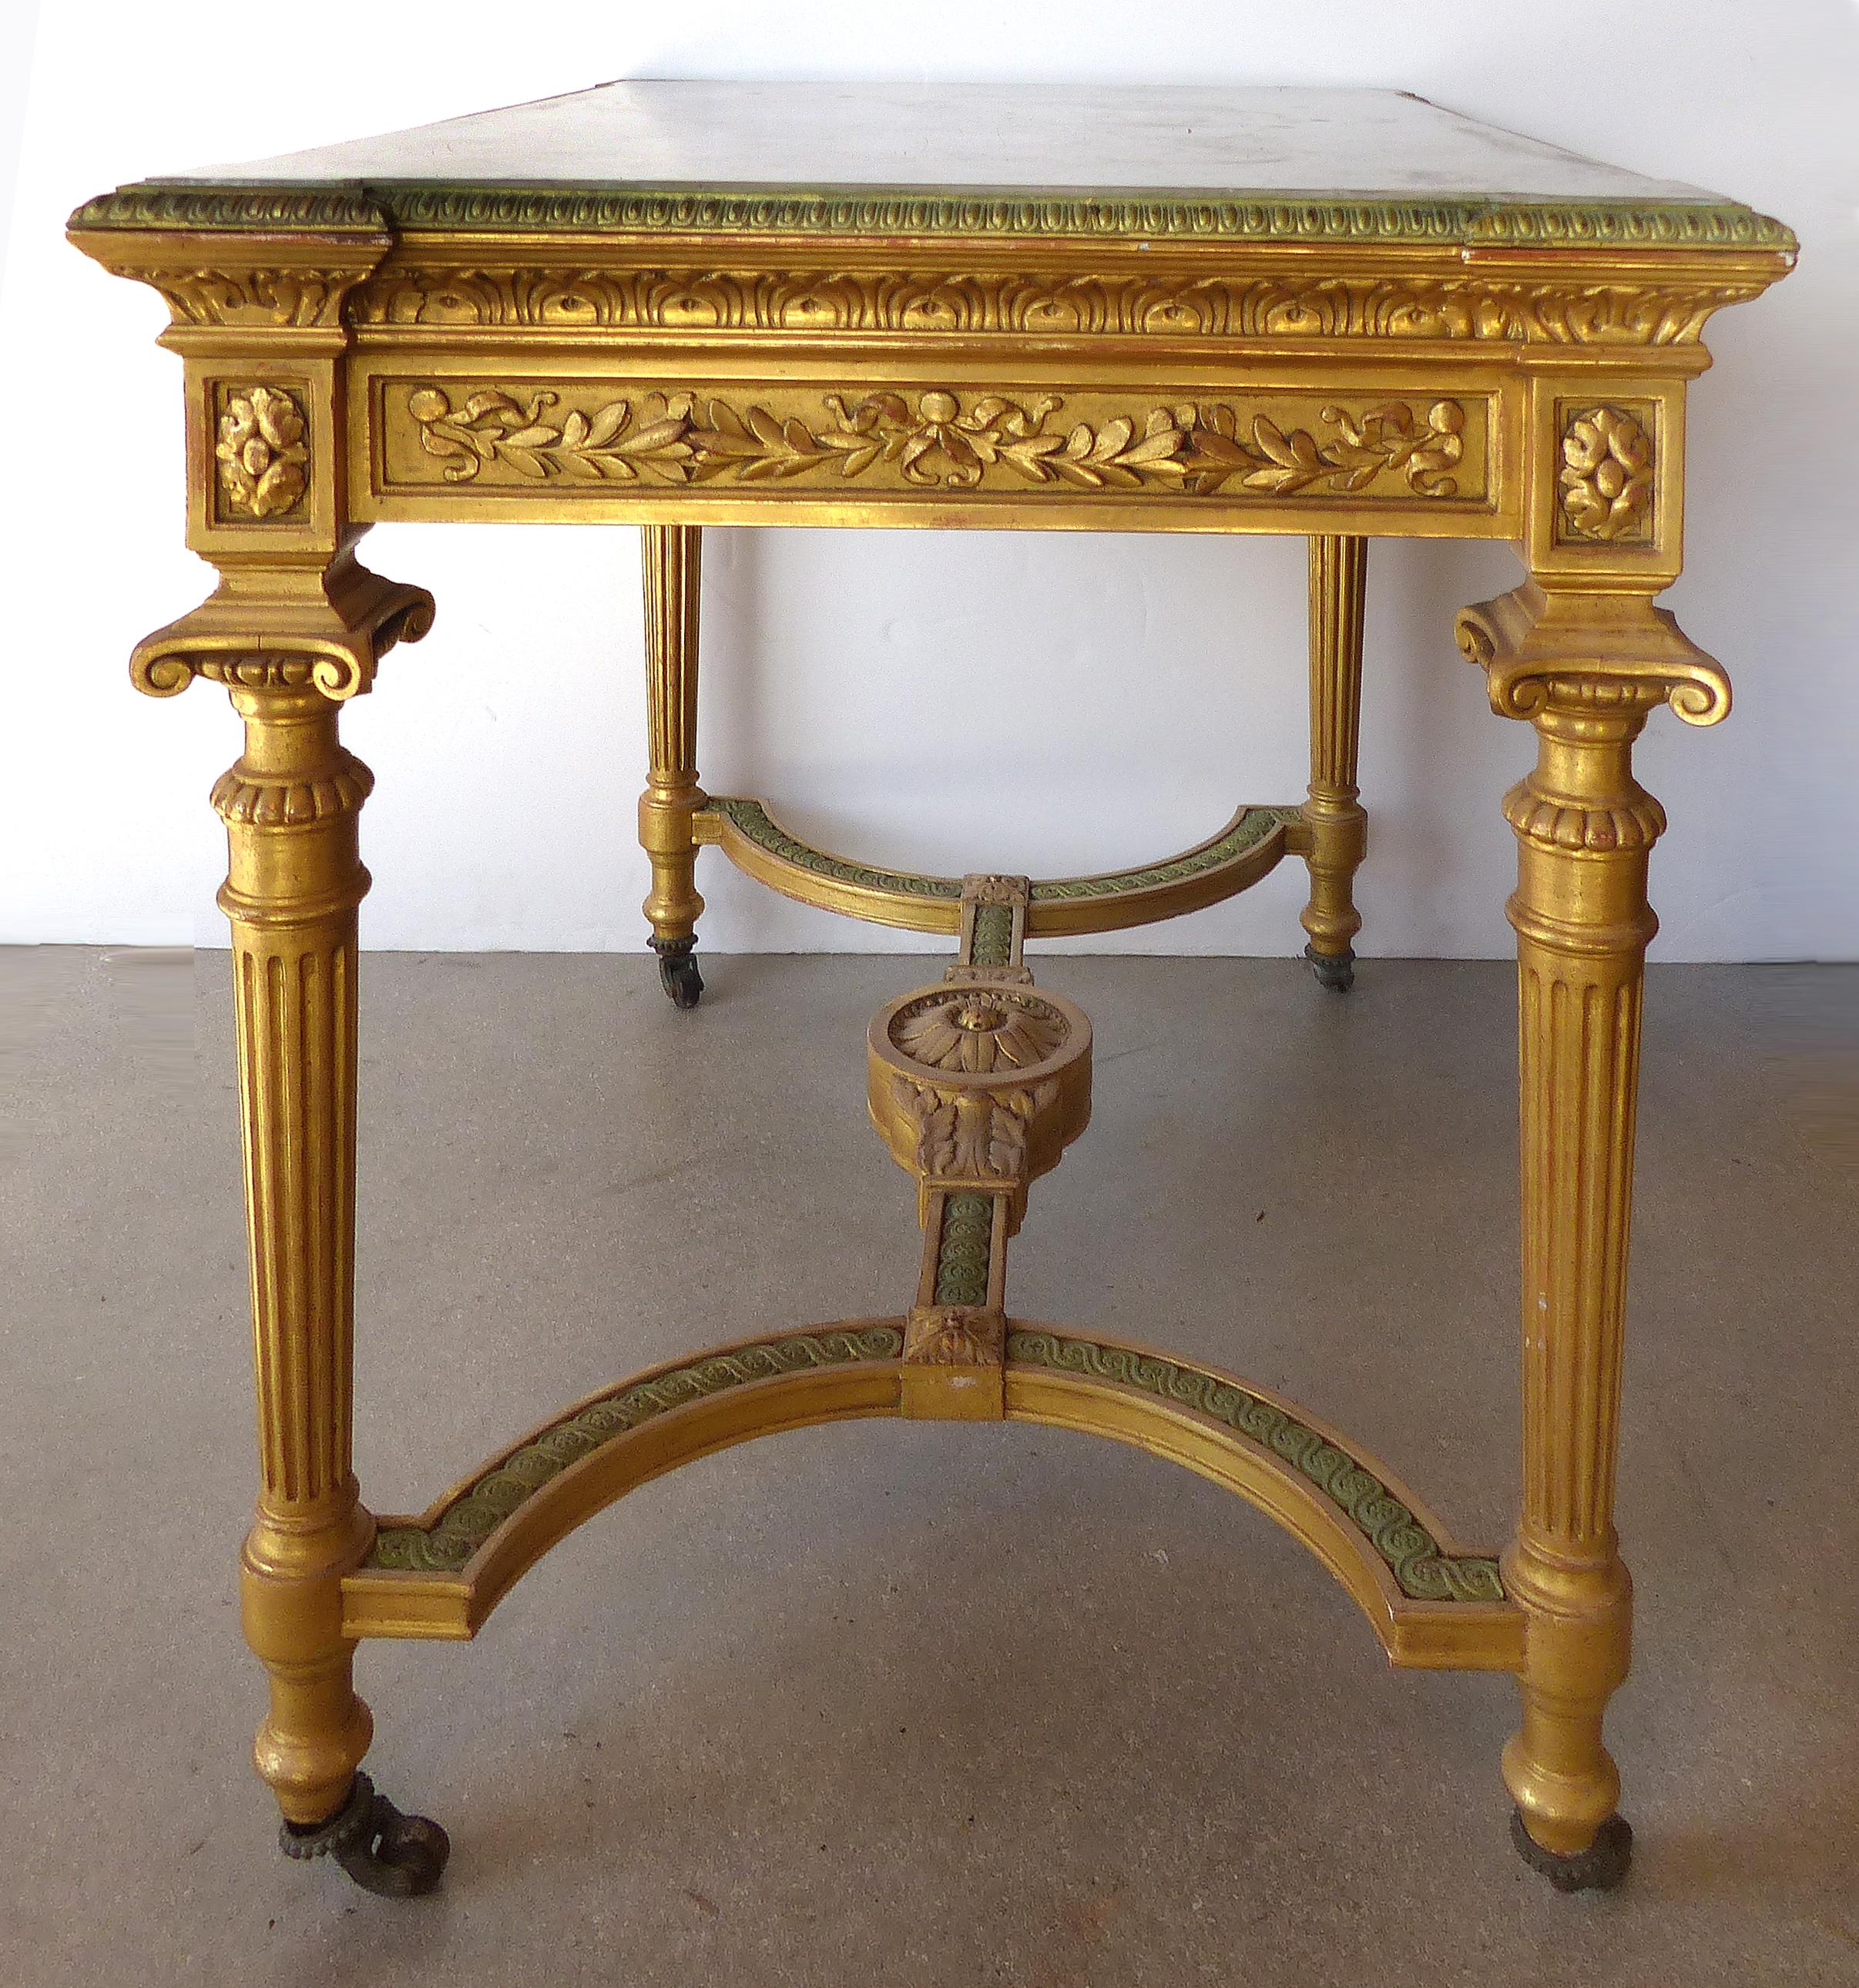 18th century French Louis XVI giltwood console table with inset onyx top

Offered for sale is a rare and fine quality late 18th century giltwood console table with inset onyx top that was acquired from the Vanderbilt family's famed hotel in